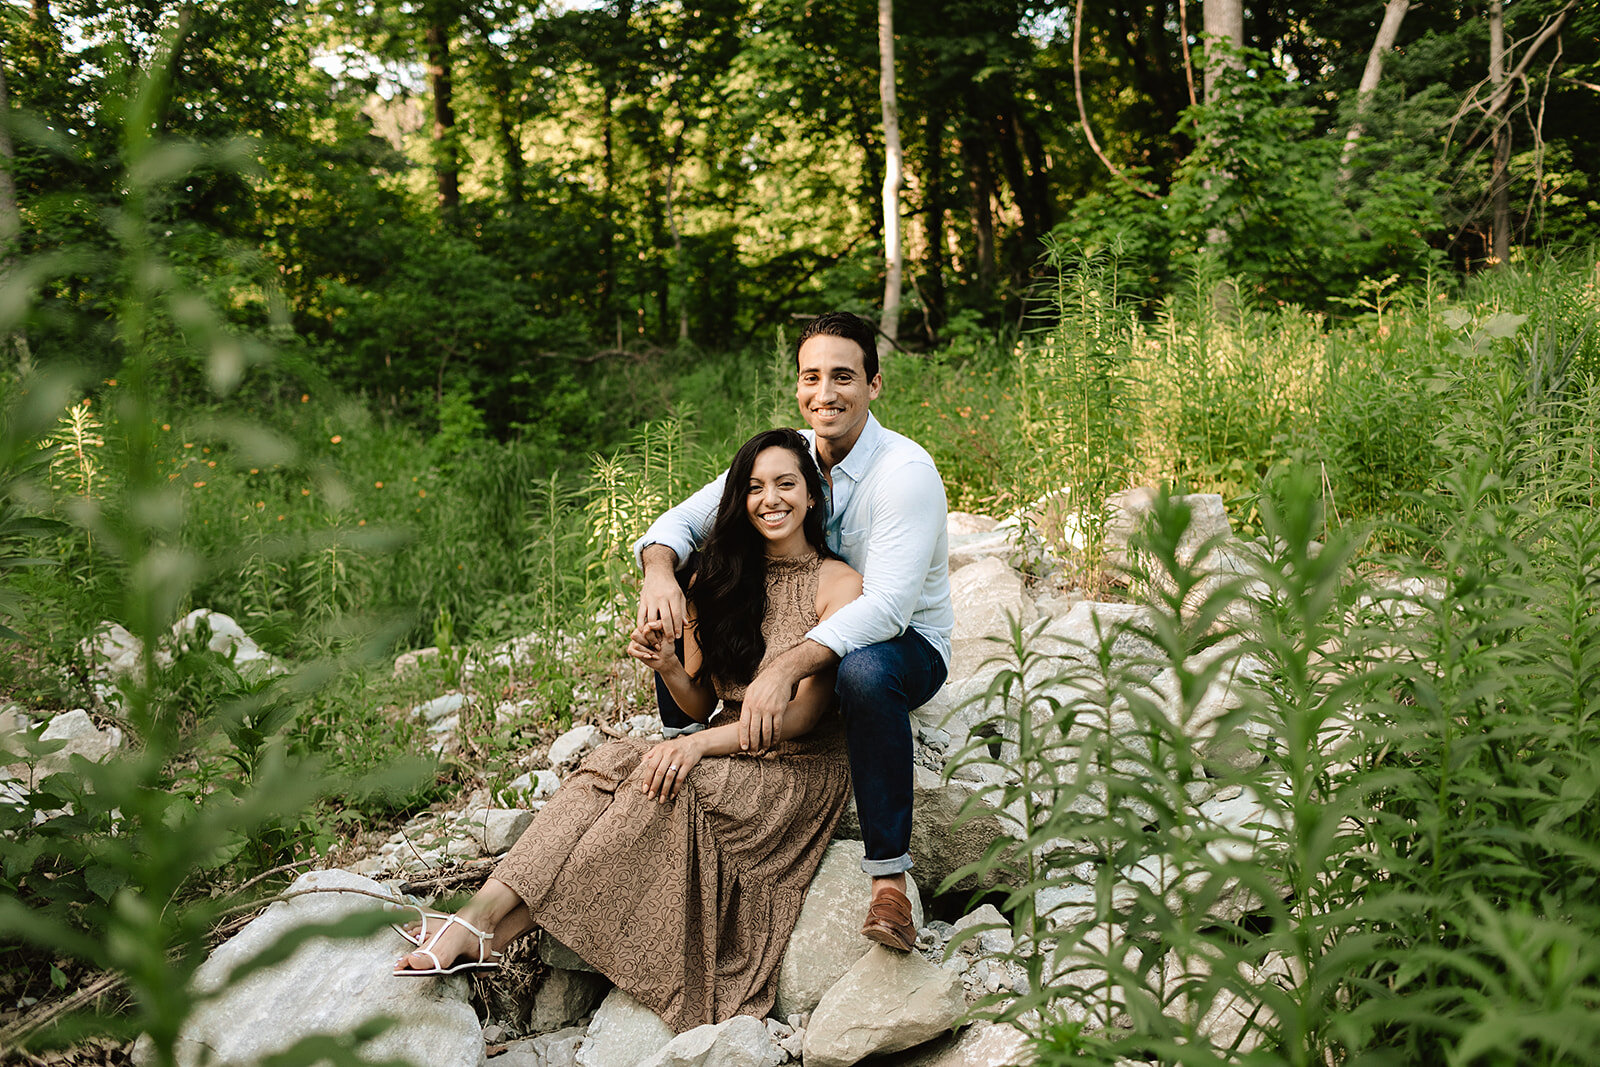 Grecia and Micah, Engagement session, Holliday Park, Indianapolis Indiana, Emily Wehner Photography-121_websize.jpg